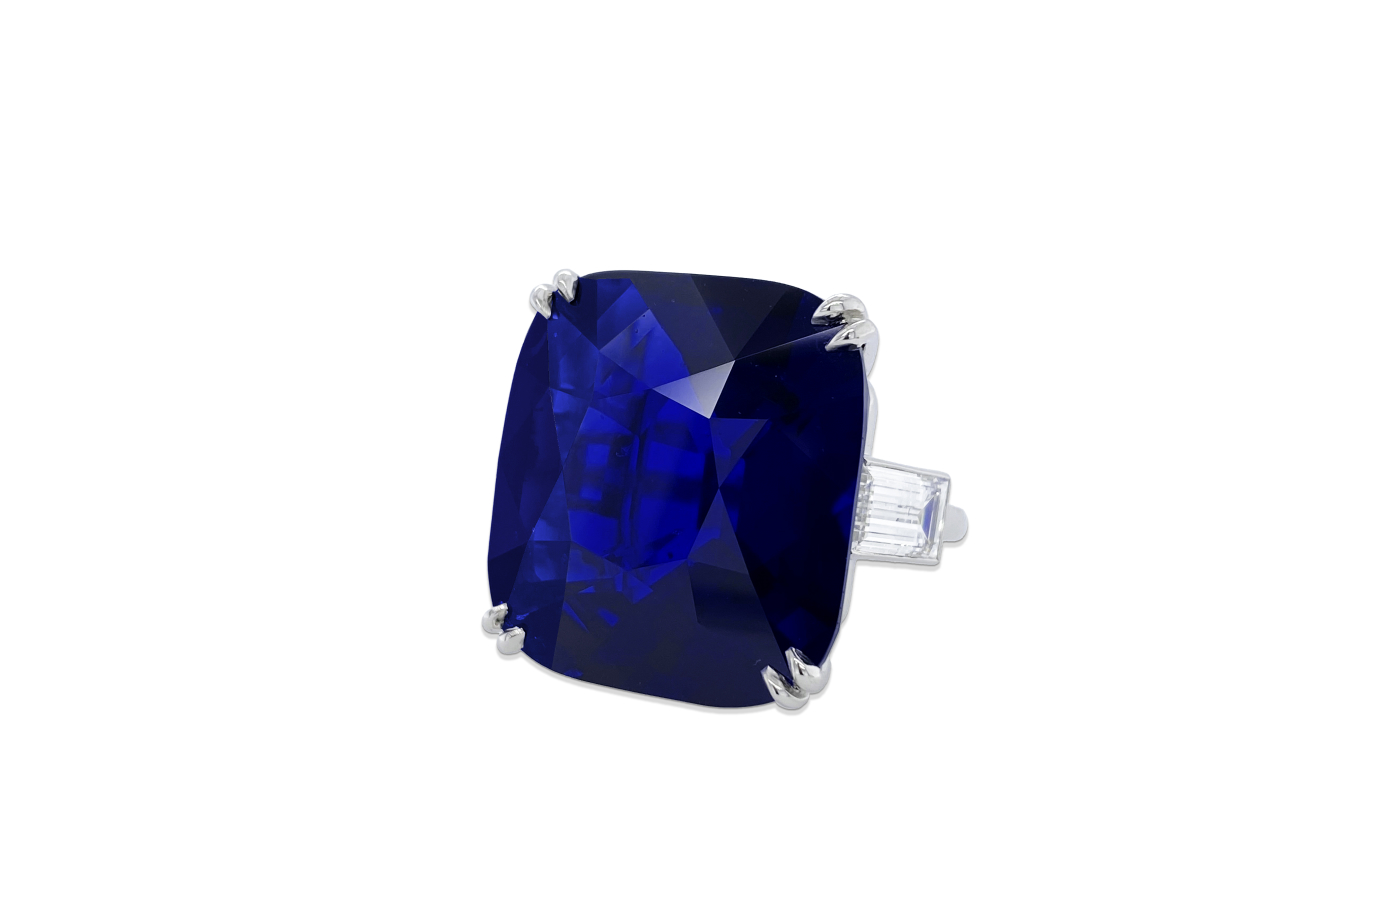 Bayco ring in platinum set with a 64-ct royal blue Ceylon sapphire and diamonds